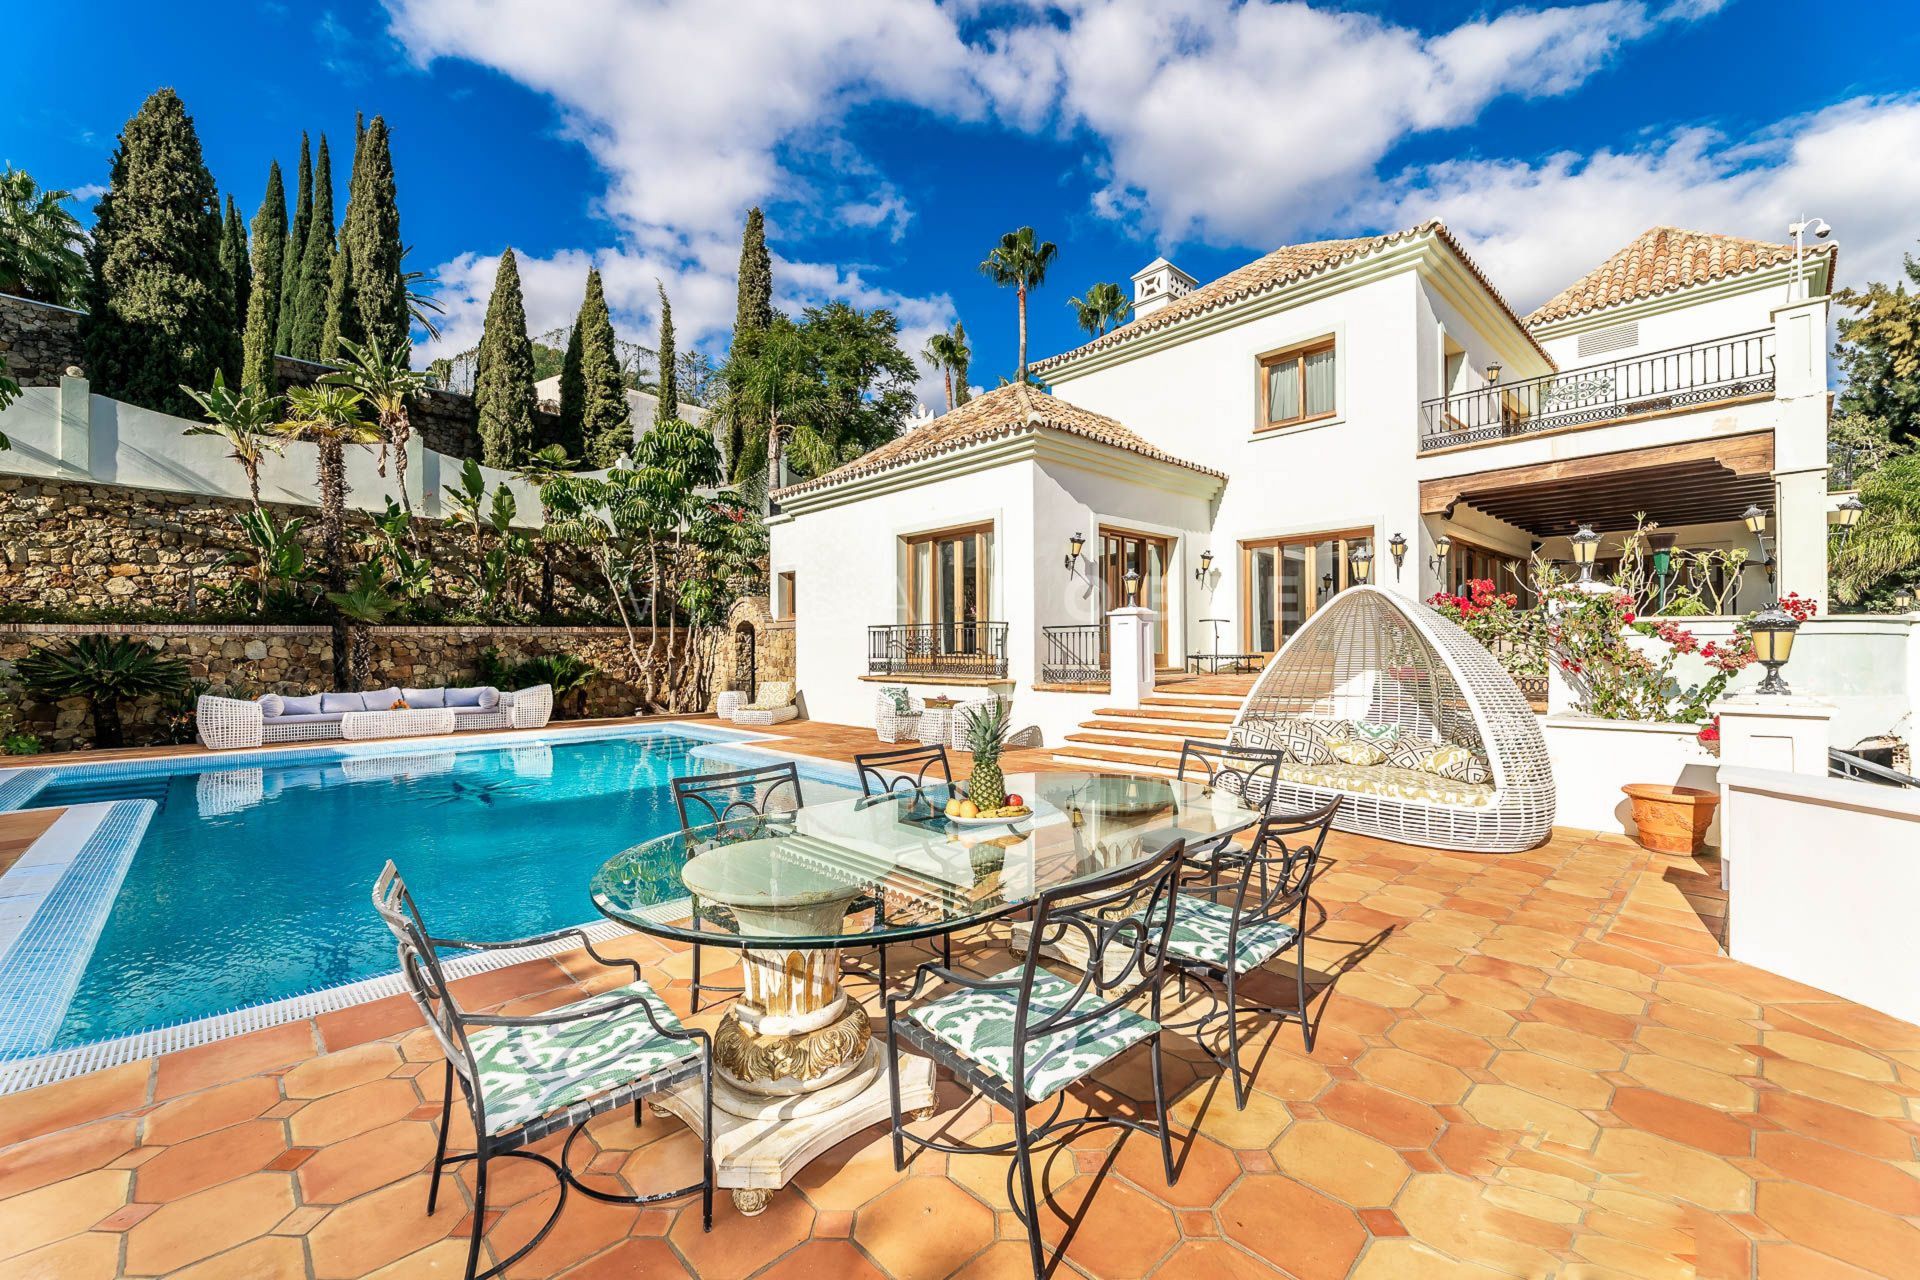 Luxury Mediterranean Palace with 16 bedrooms at El Paraiso Alto, Benahavis, surrounded by the best golf courses